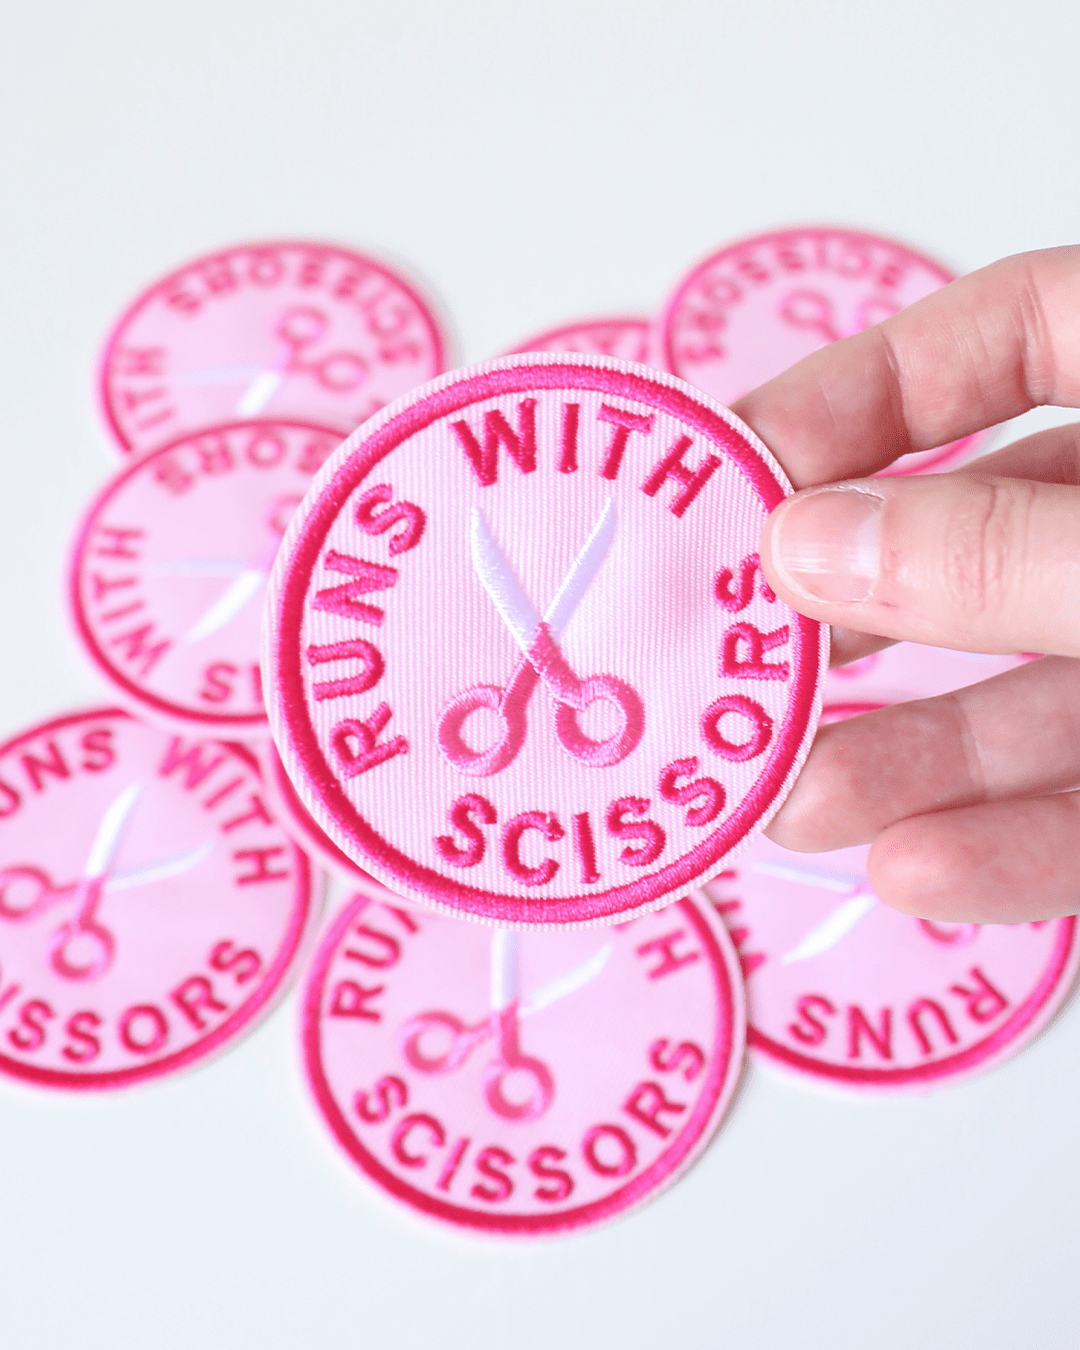 Runs With Scissors Patch - Funny Embroidered Iron On Clothes Patch - Runs With Scissors Patch